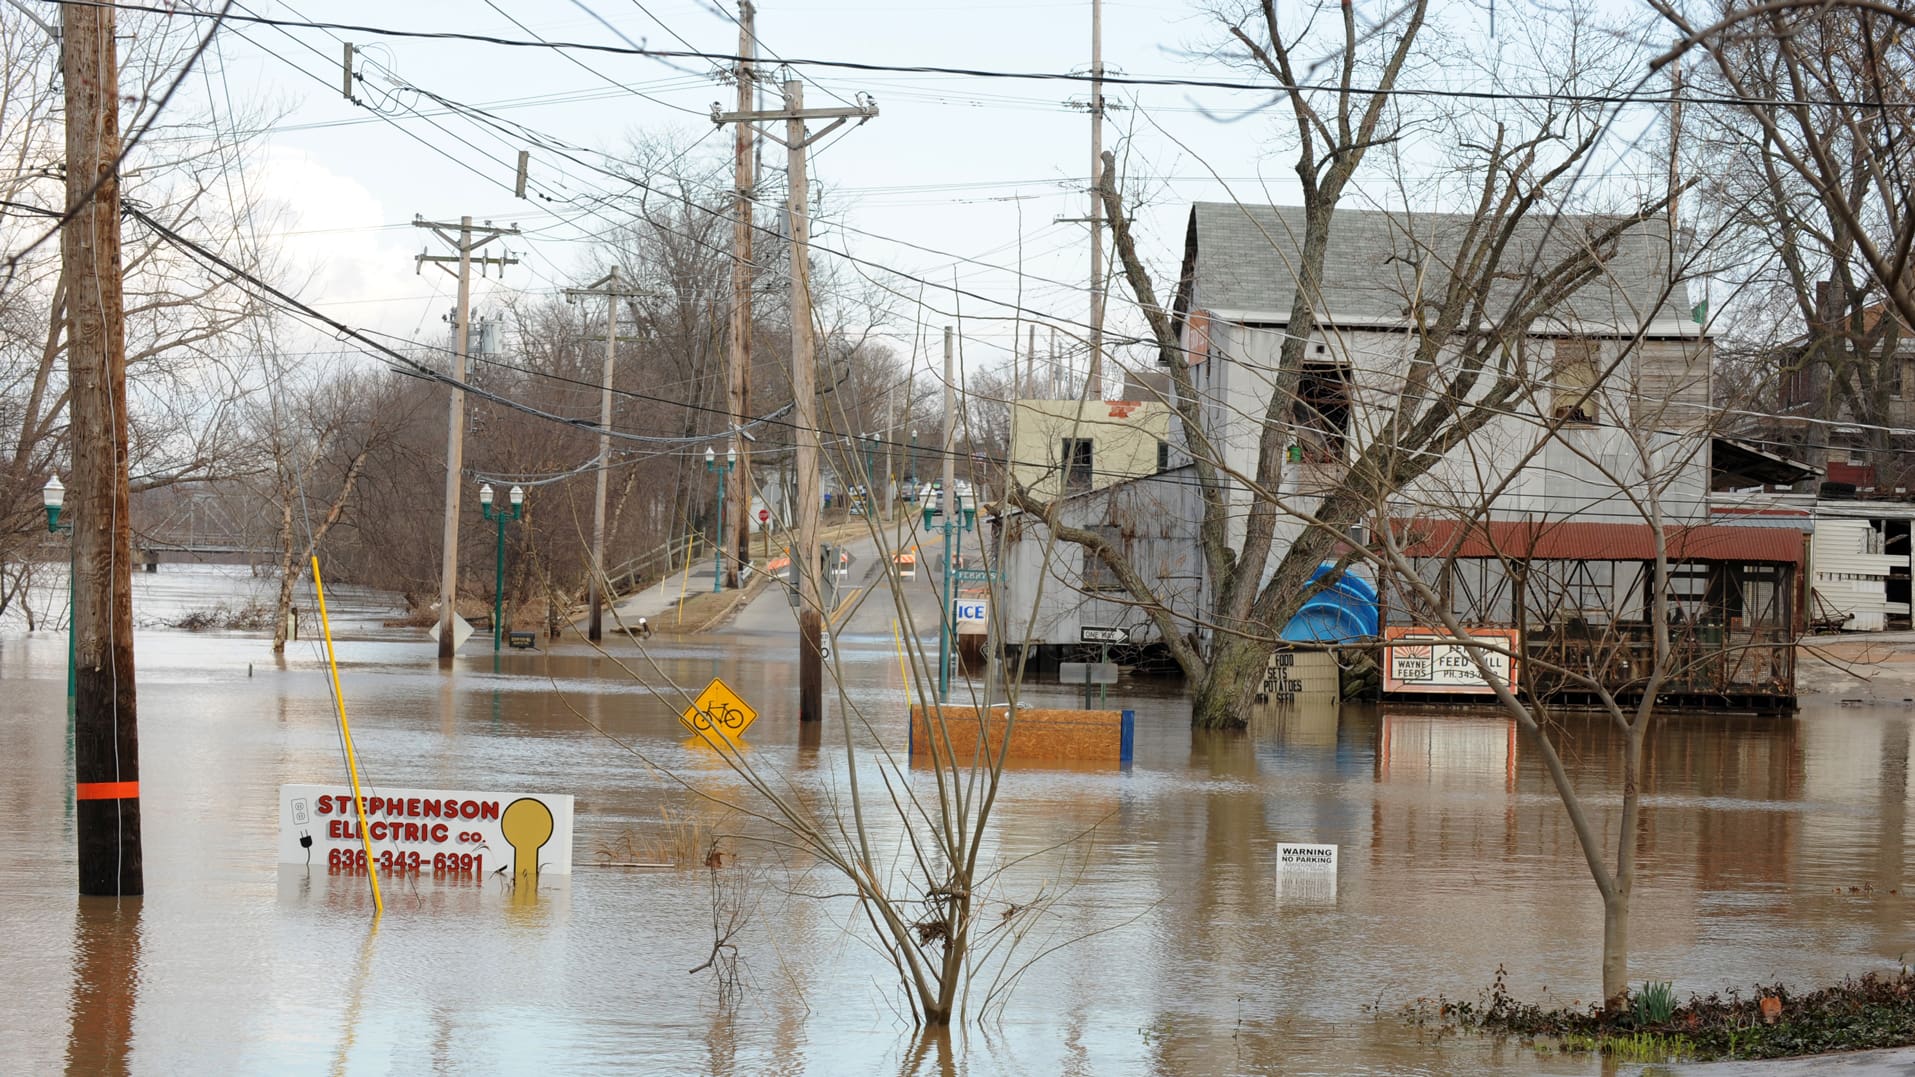 Trees and street signs partially submerged in river water with a buildings standing in floodwater in the background.